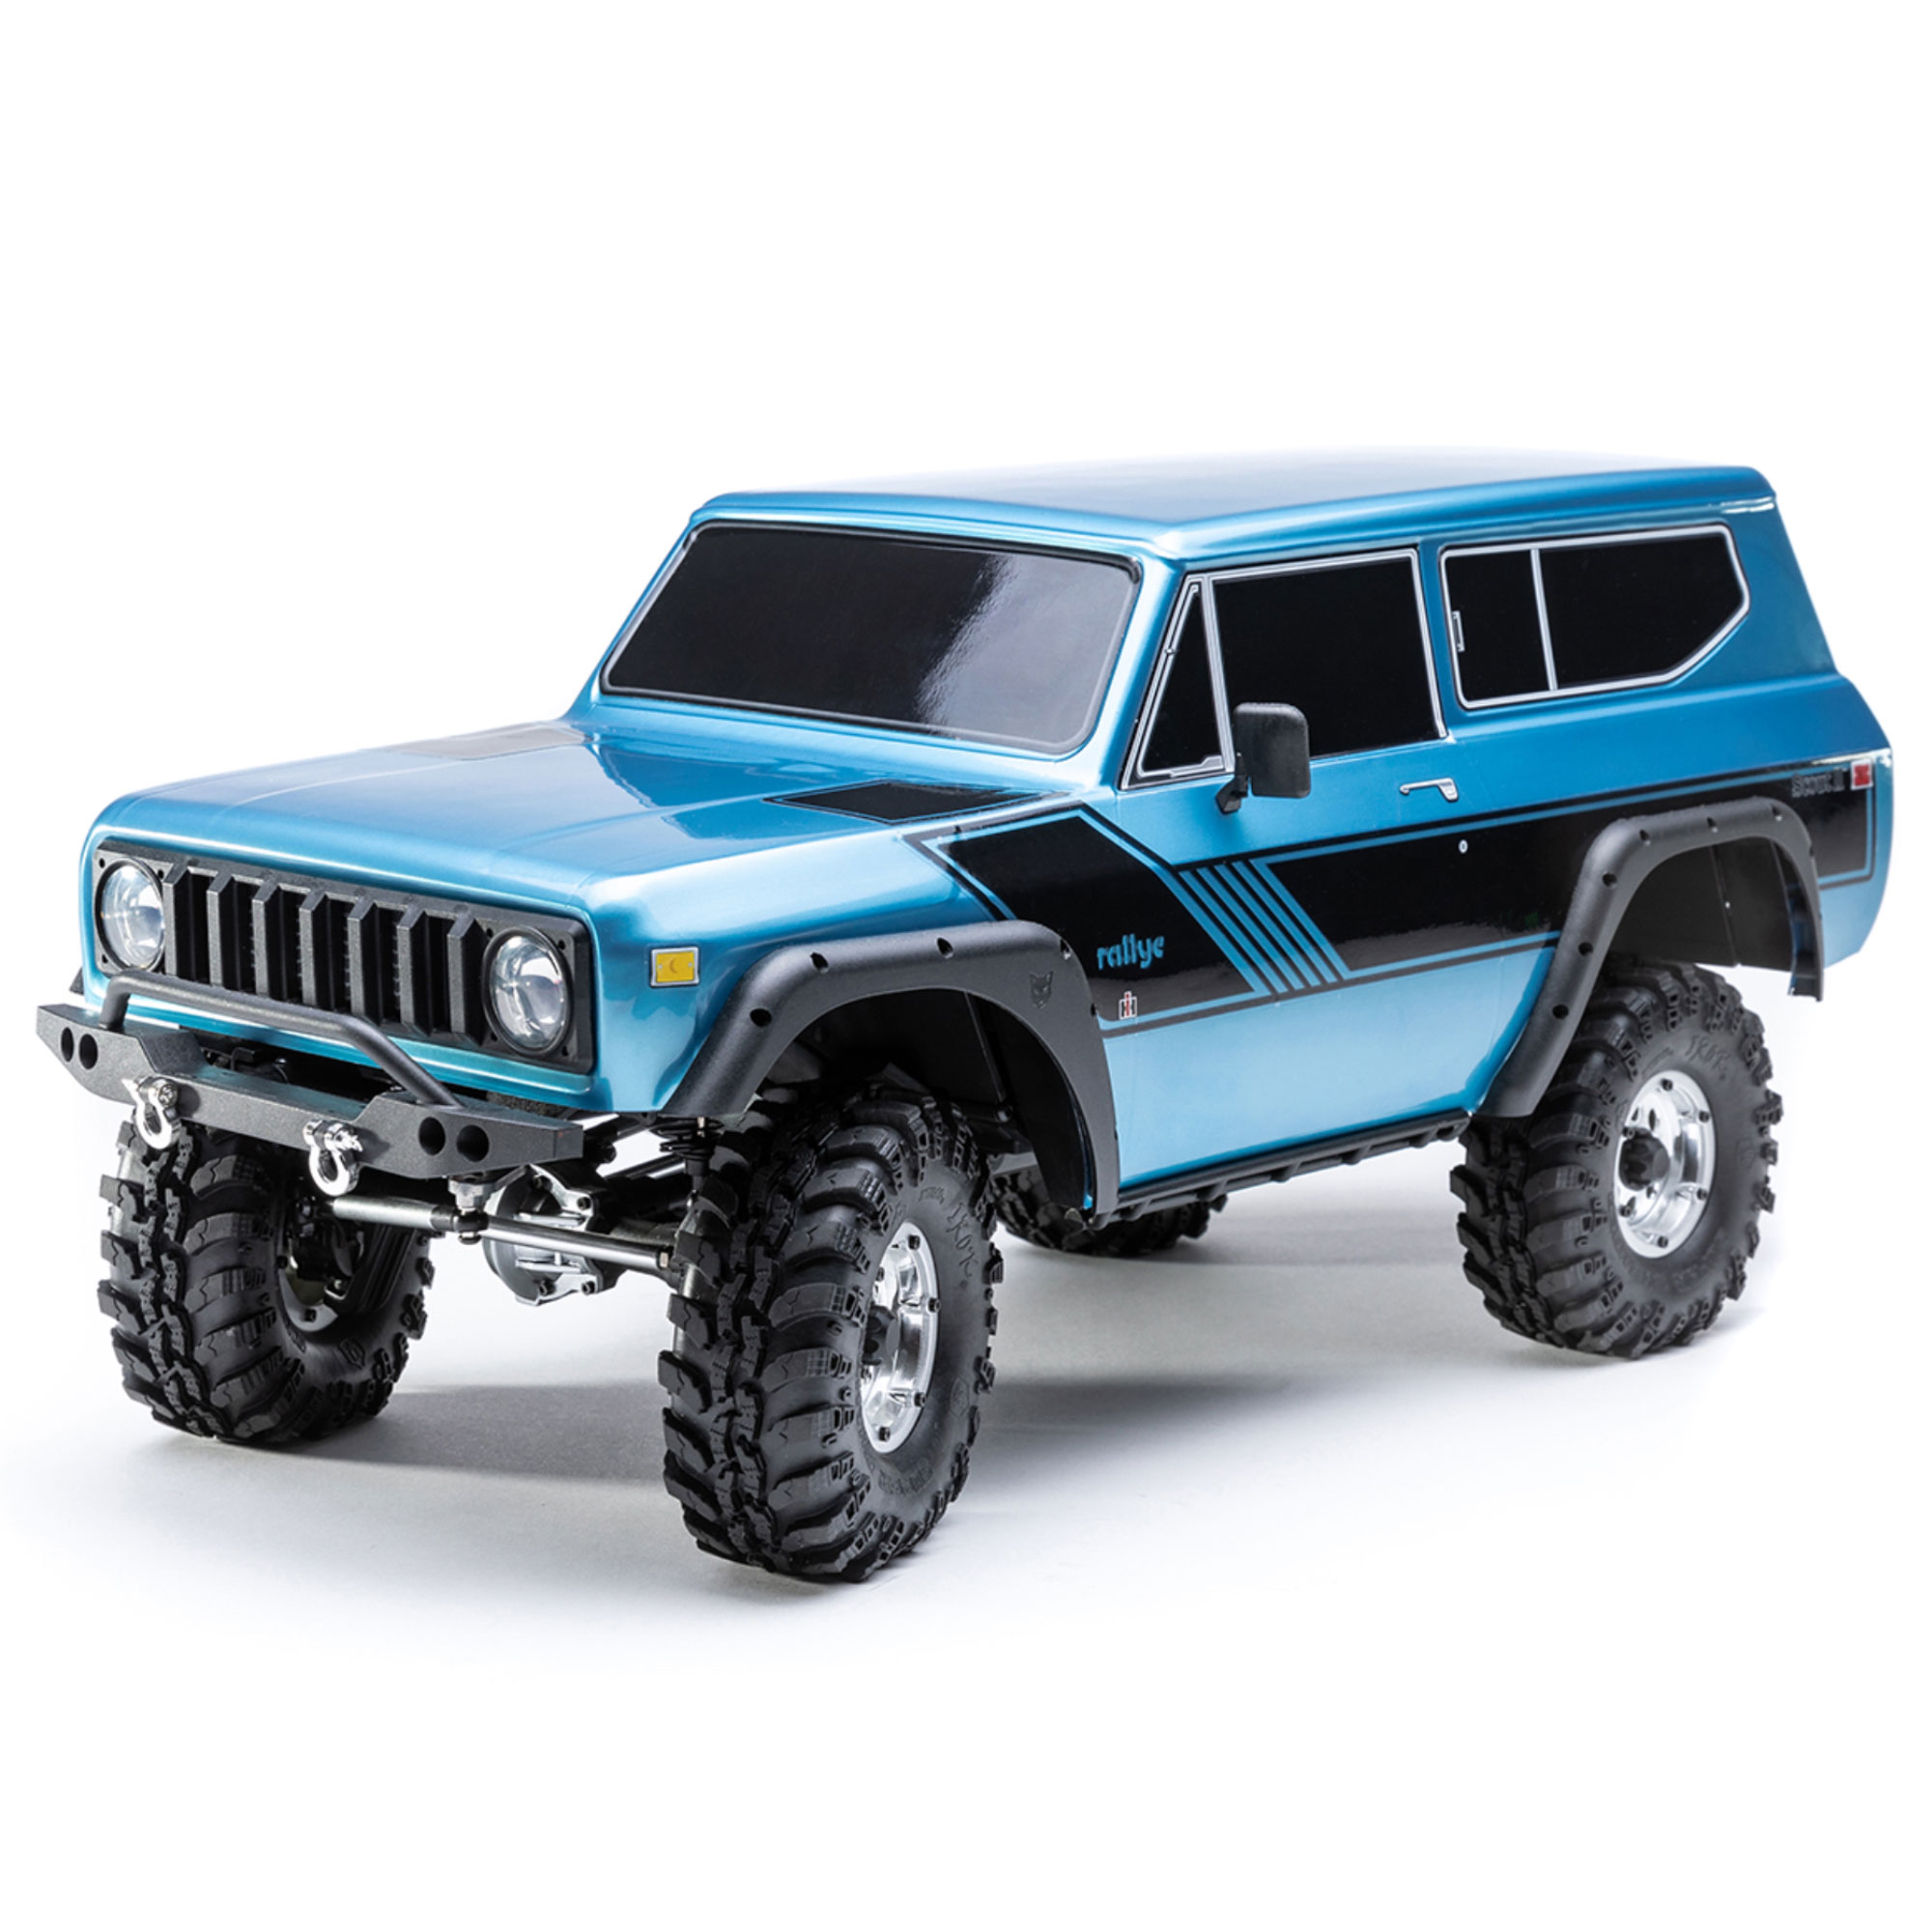 RedCAT Racing gen8 4wd Crawler 1/10 pre-assembled Chassis Kit-rc00007kit 